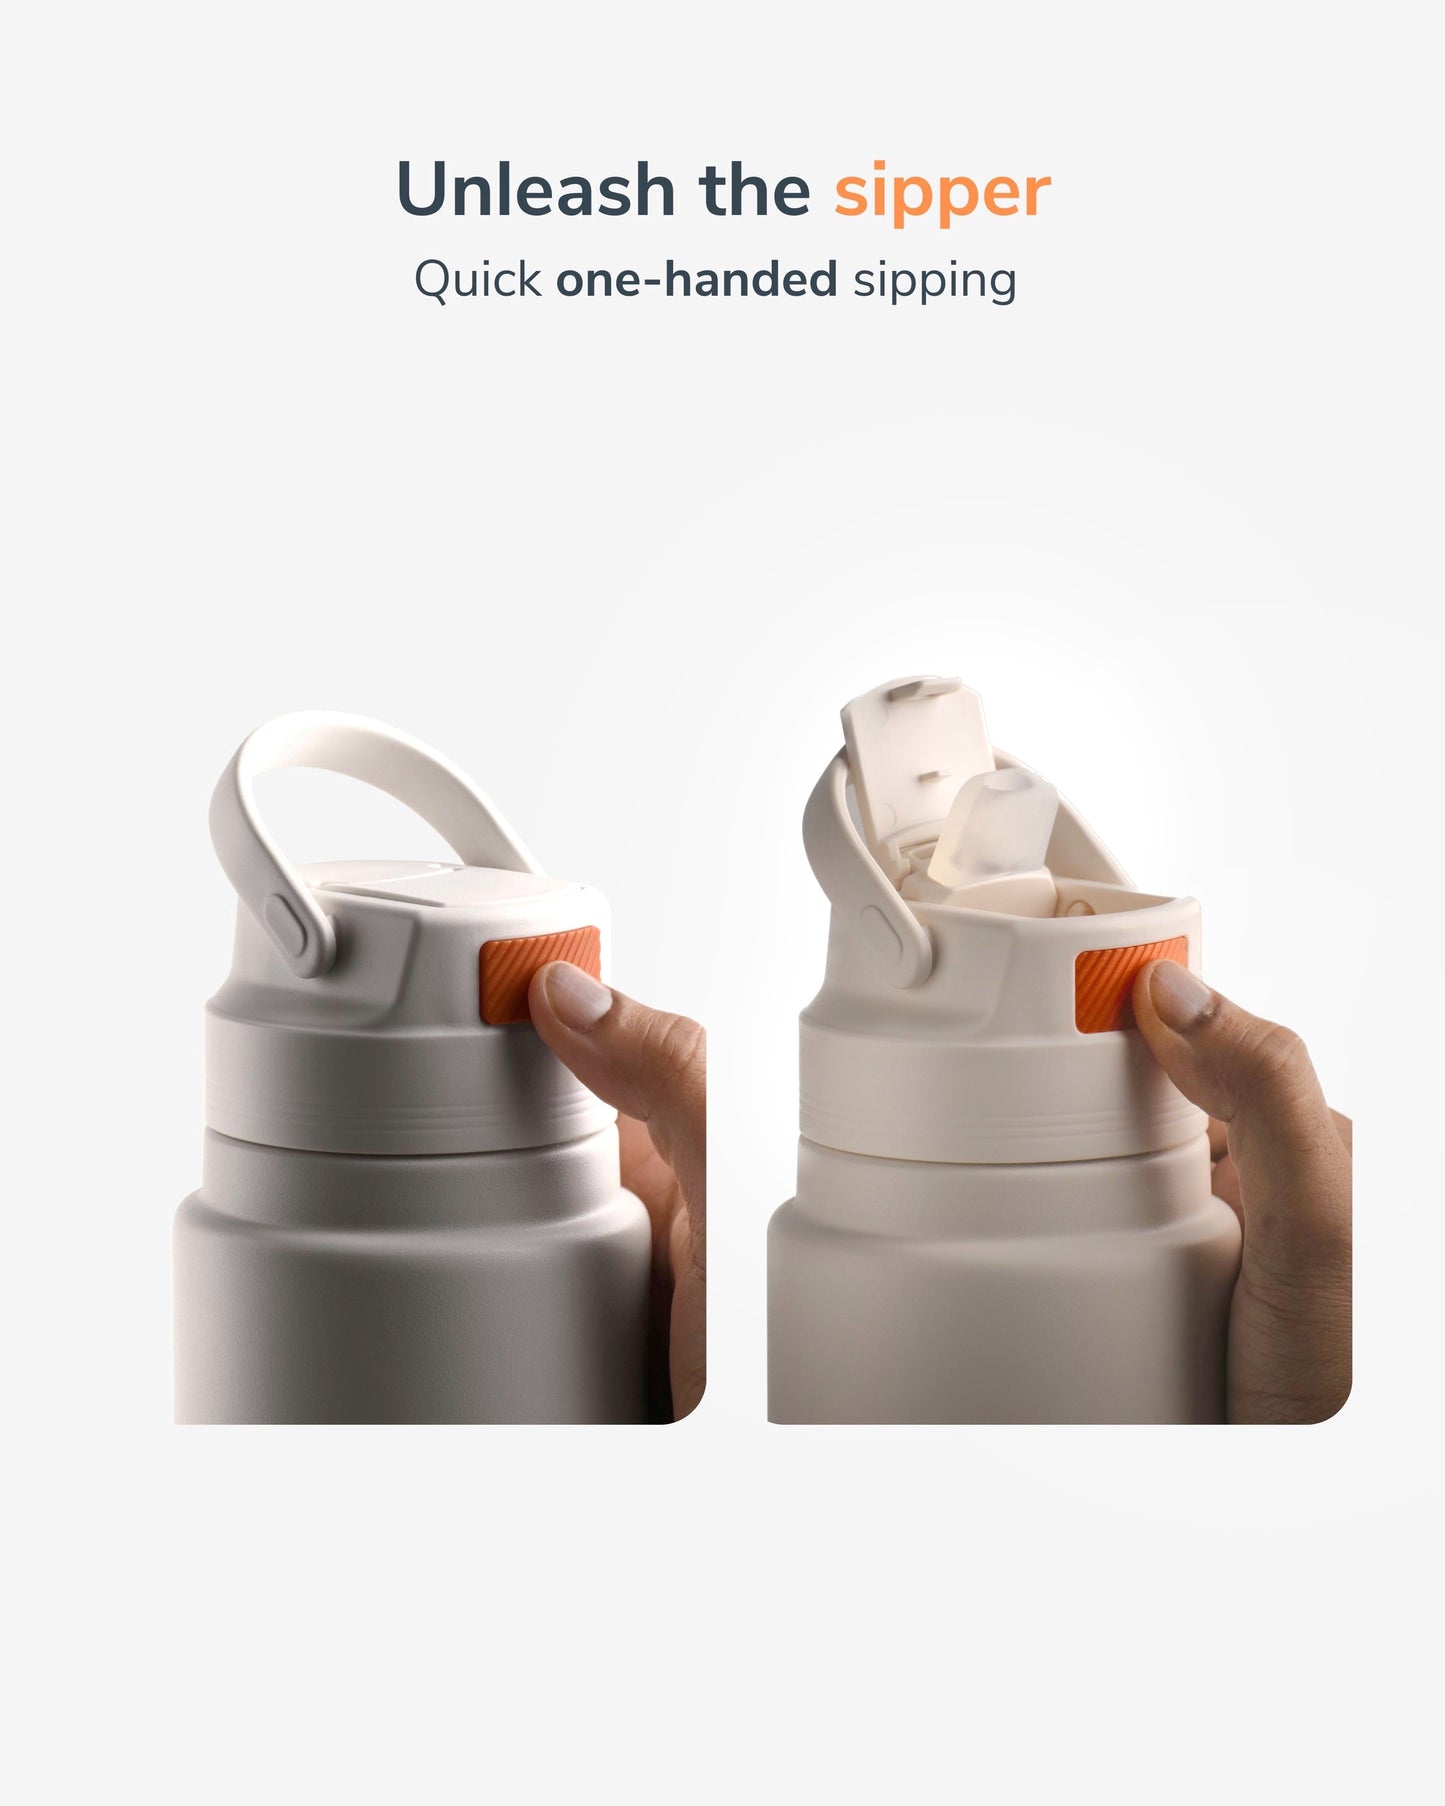 Droid sipper flask